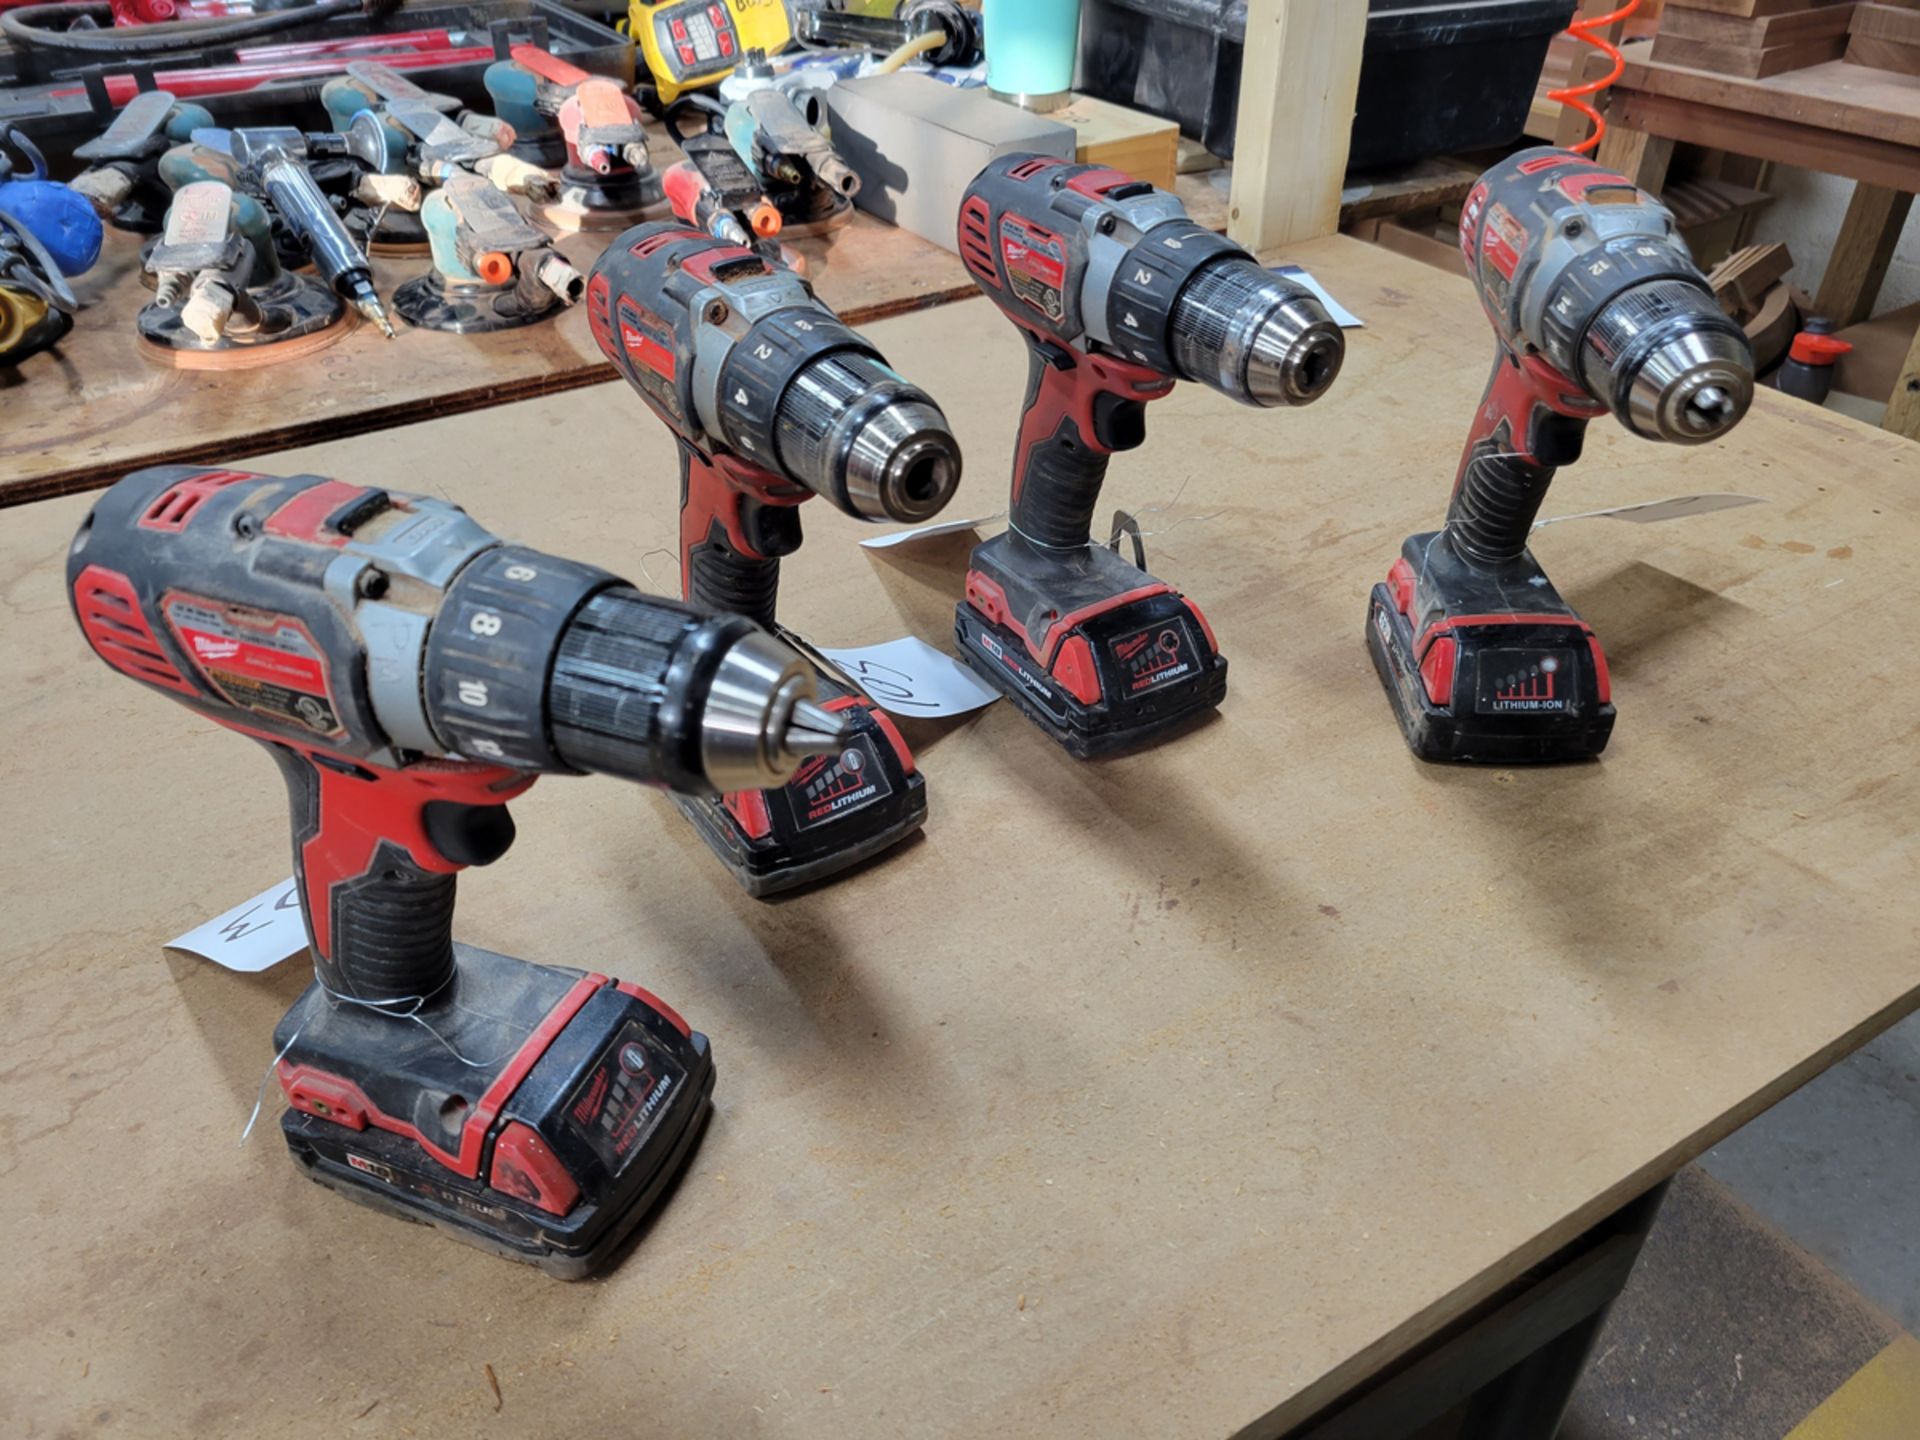 {EACH} (4) Milwaukee 18 Volt 1/2" Drill Driver w/ Battery and Charger